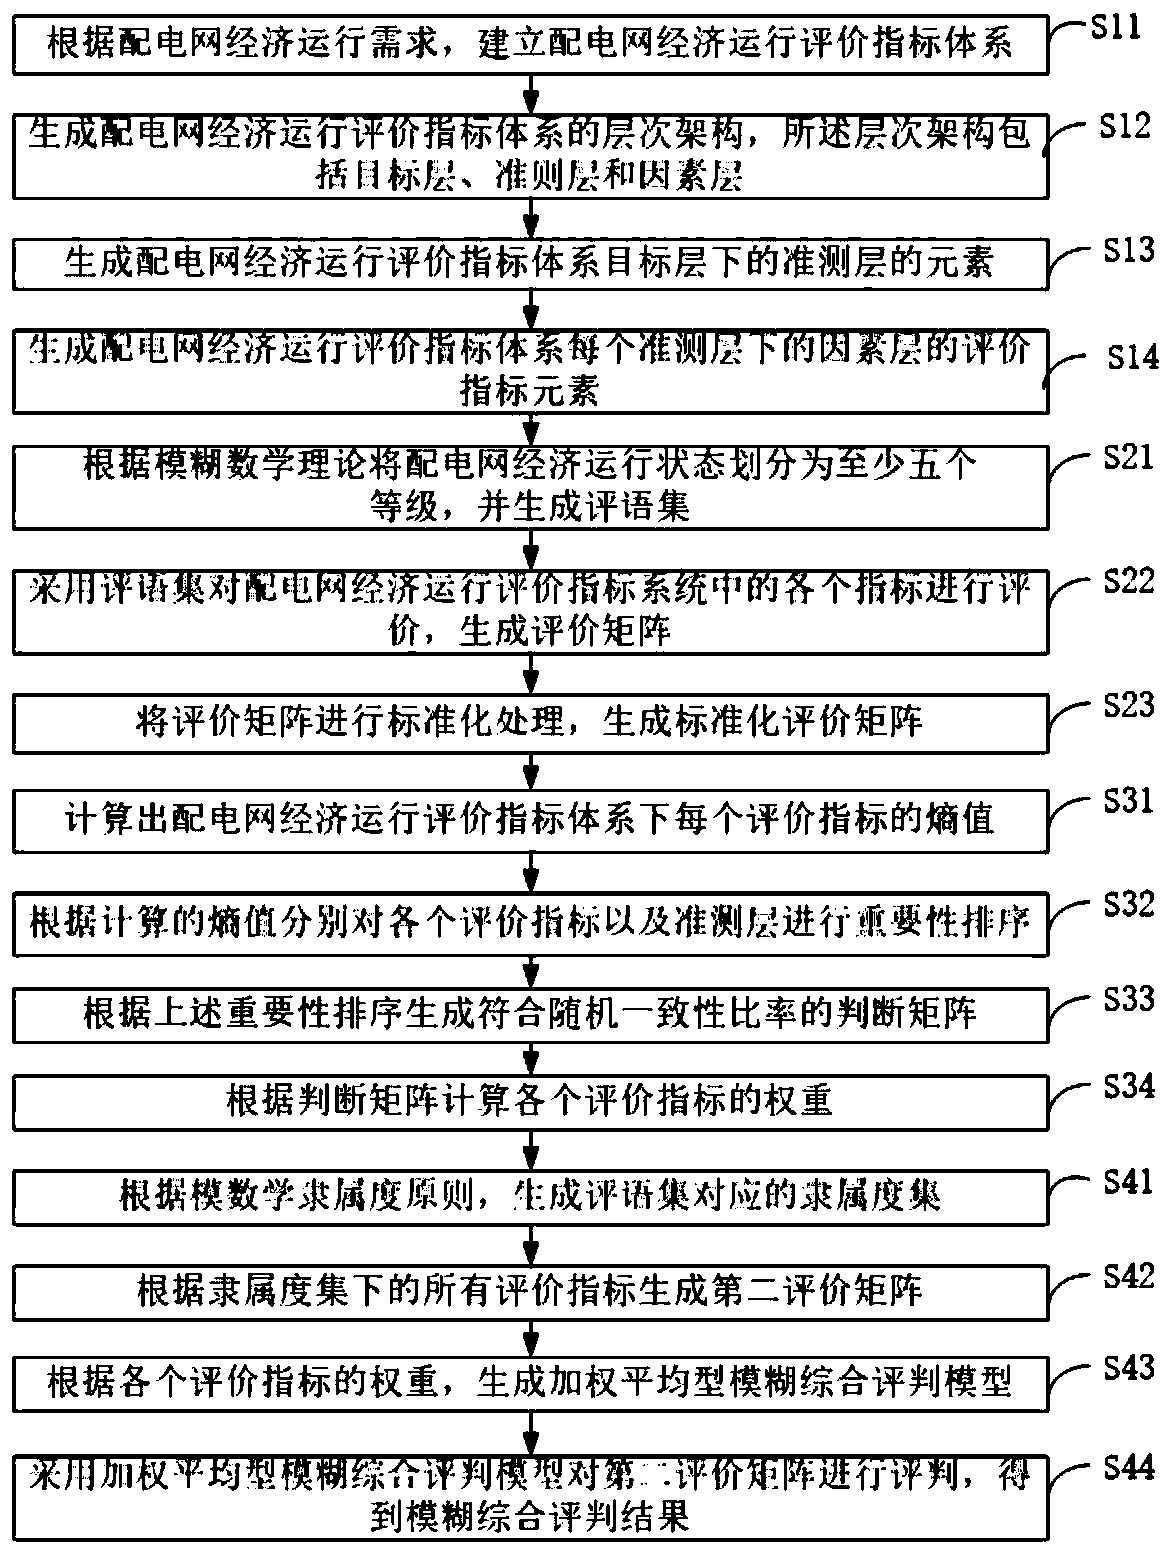 Fuzzy comprehensive evaluation method for economic operation of power distribution network